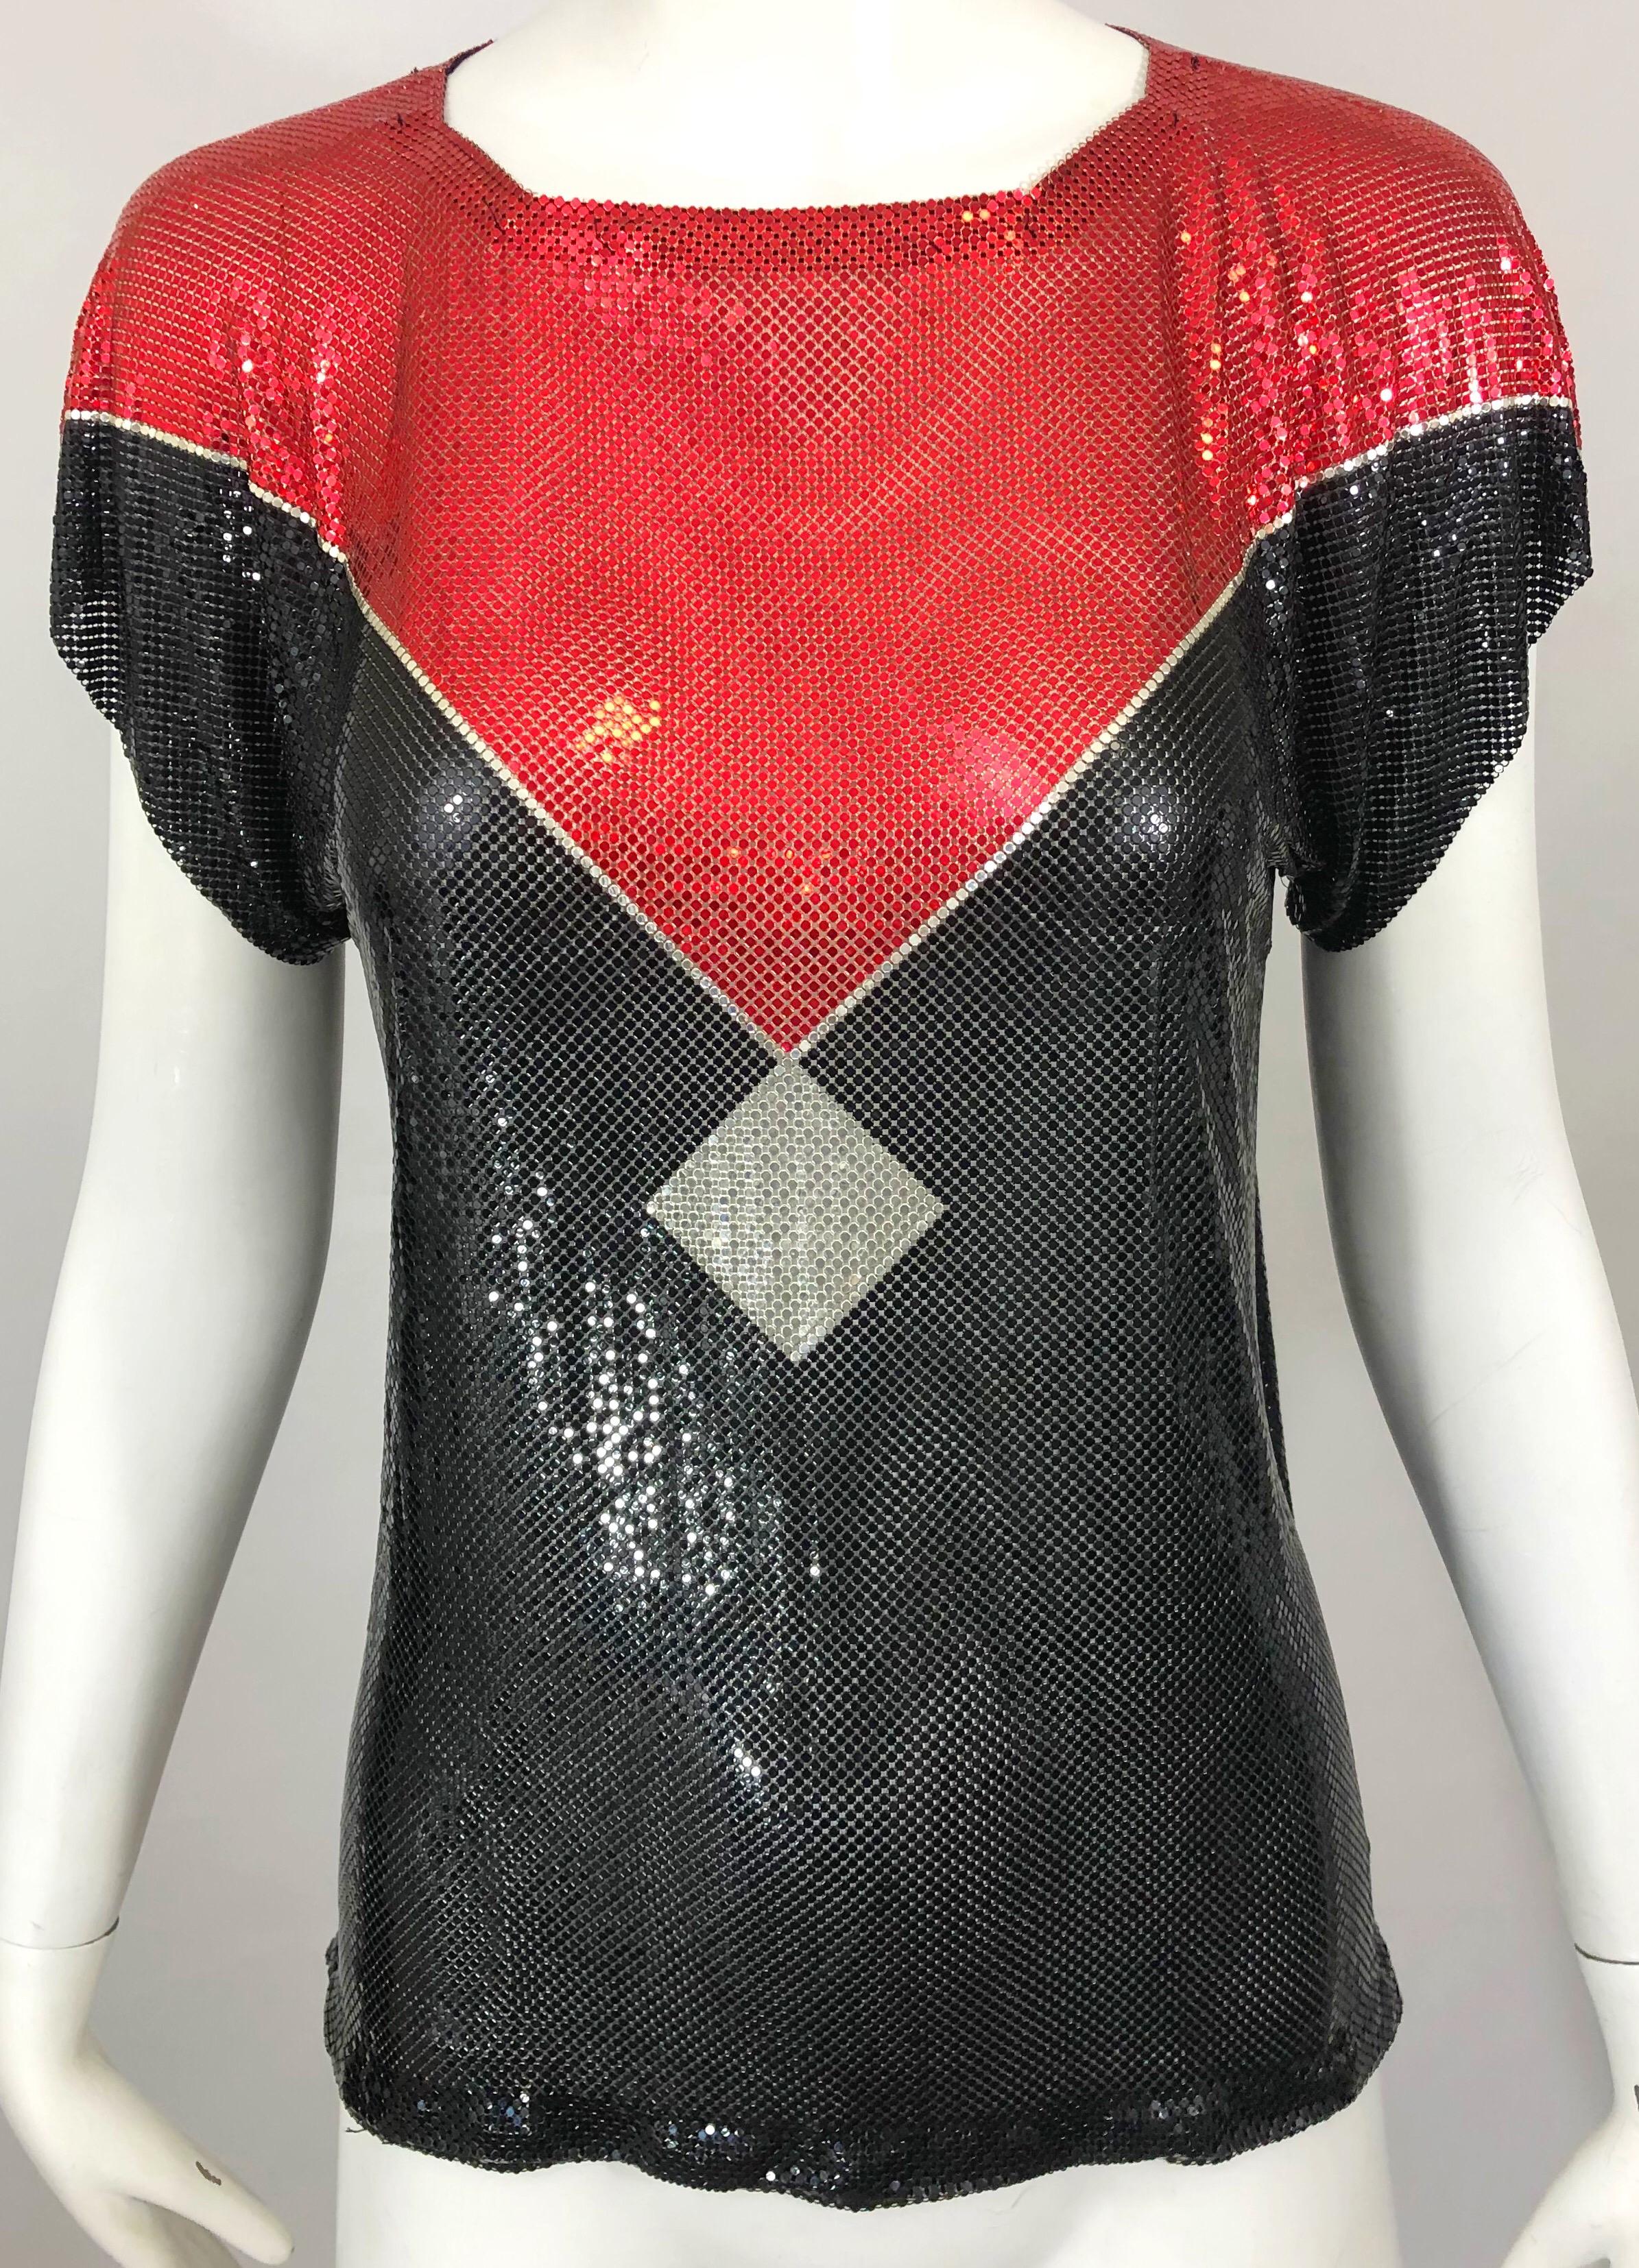 Avant Garde 1970s Whiting & Davis Red + Black + Silver Chainmail Metal Mesh Top For Sale 1